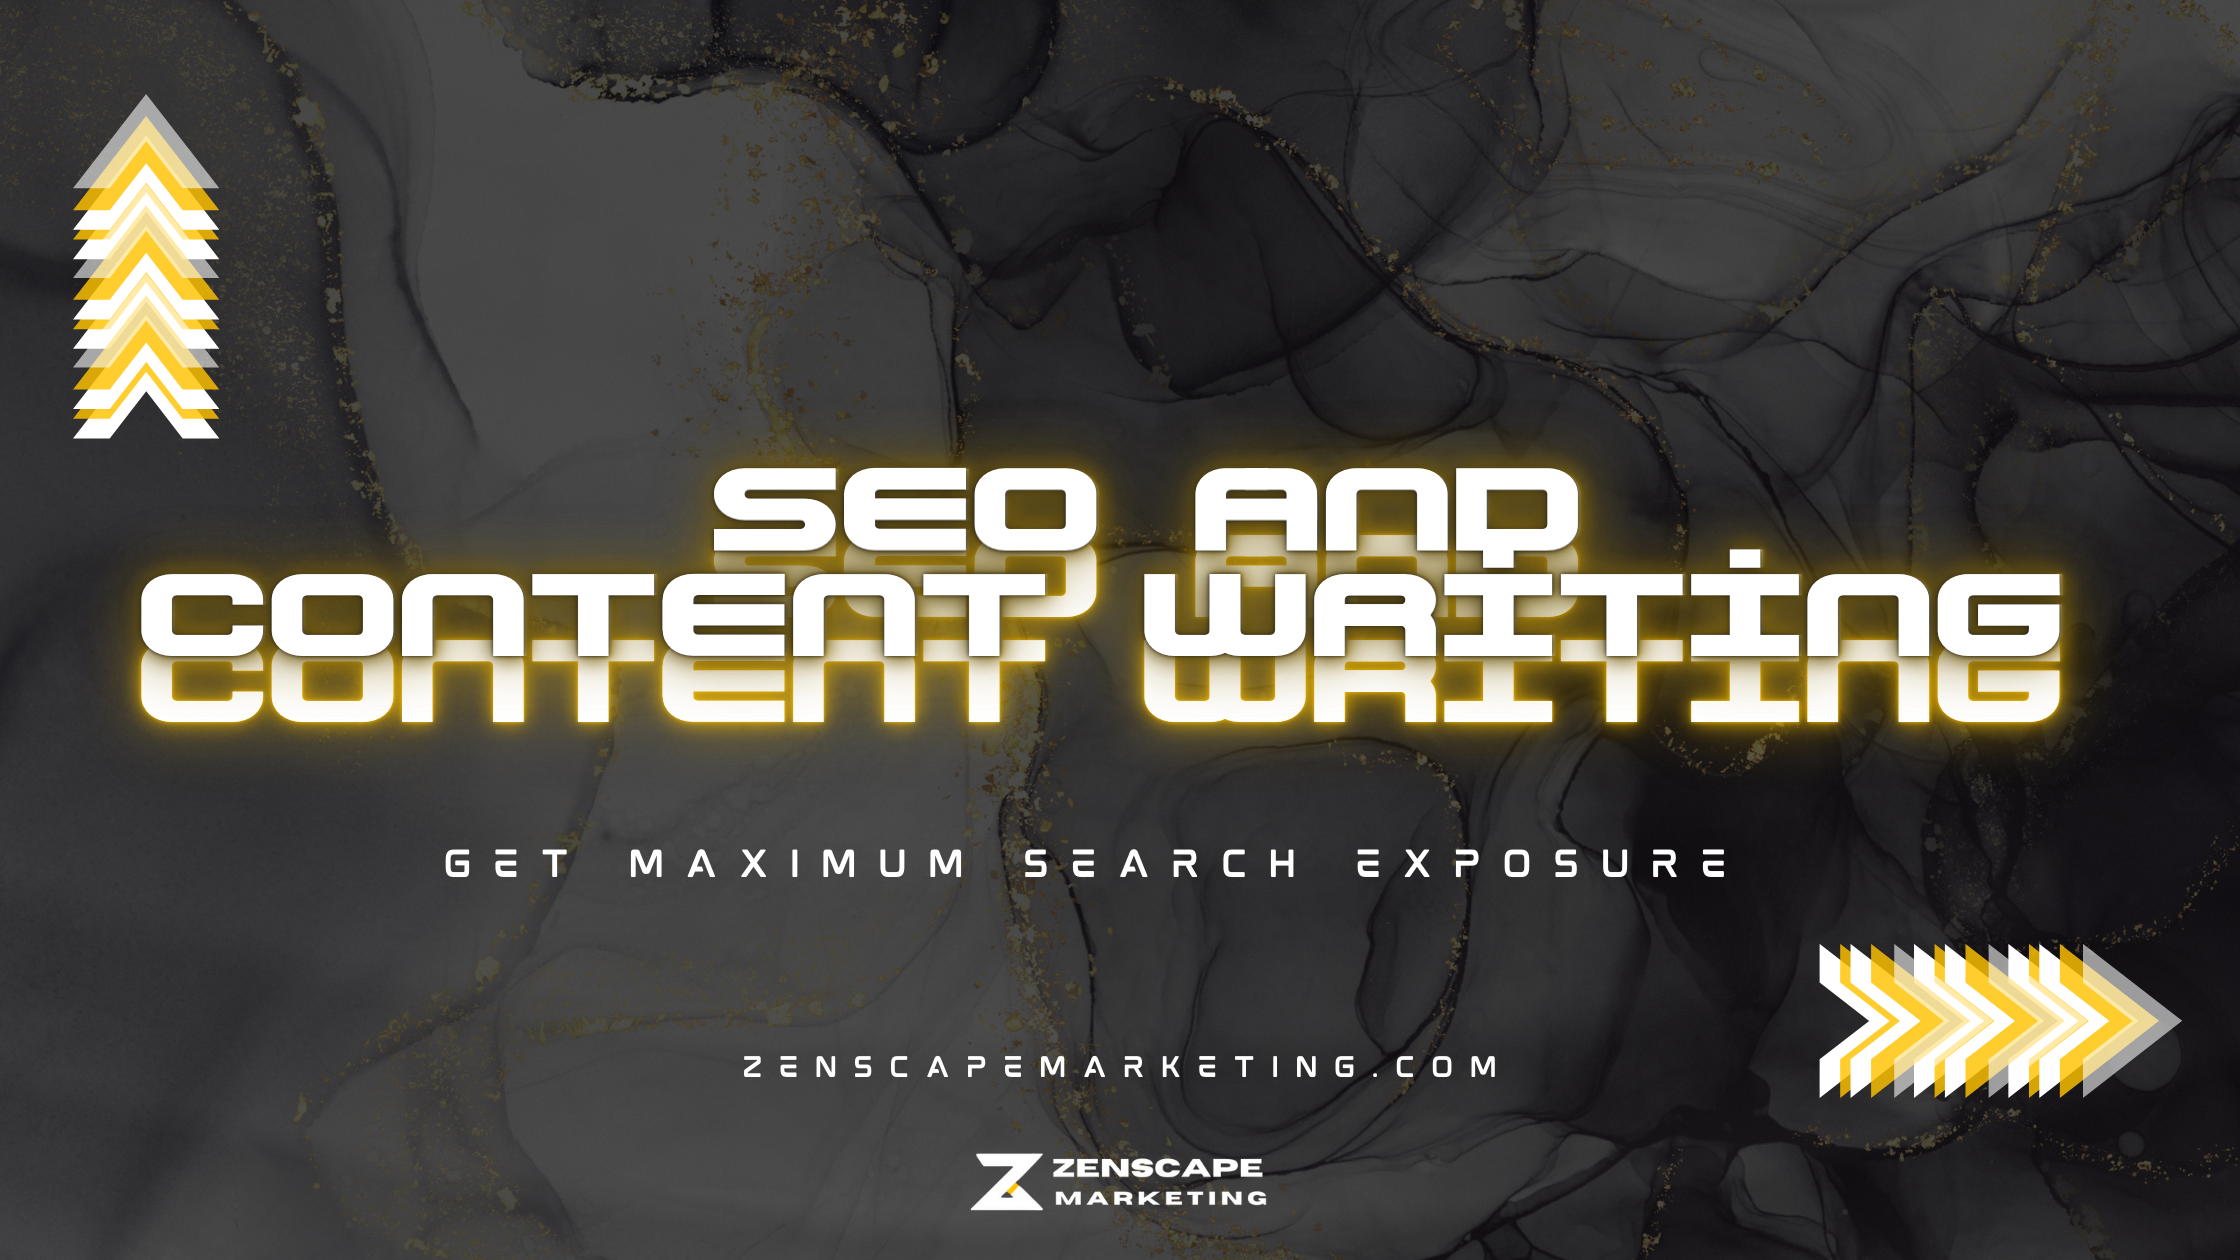 seo and content writing